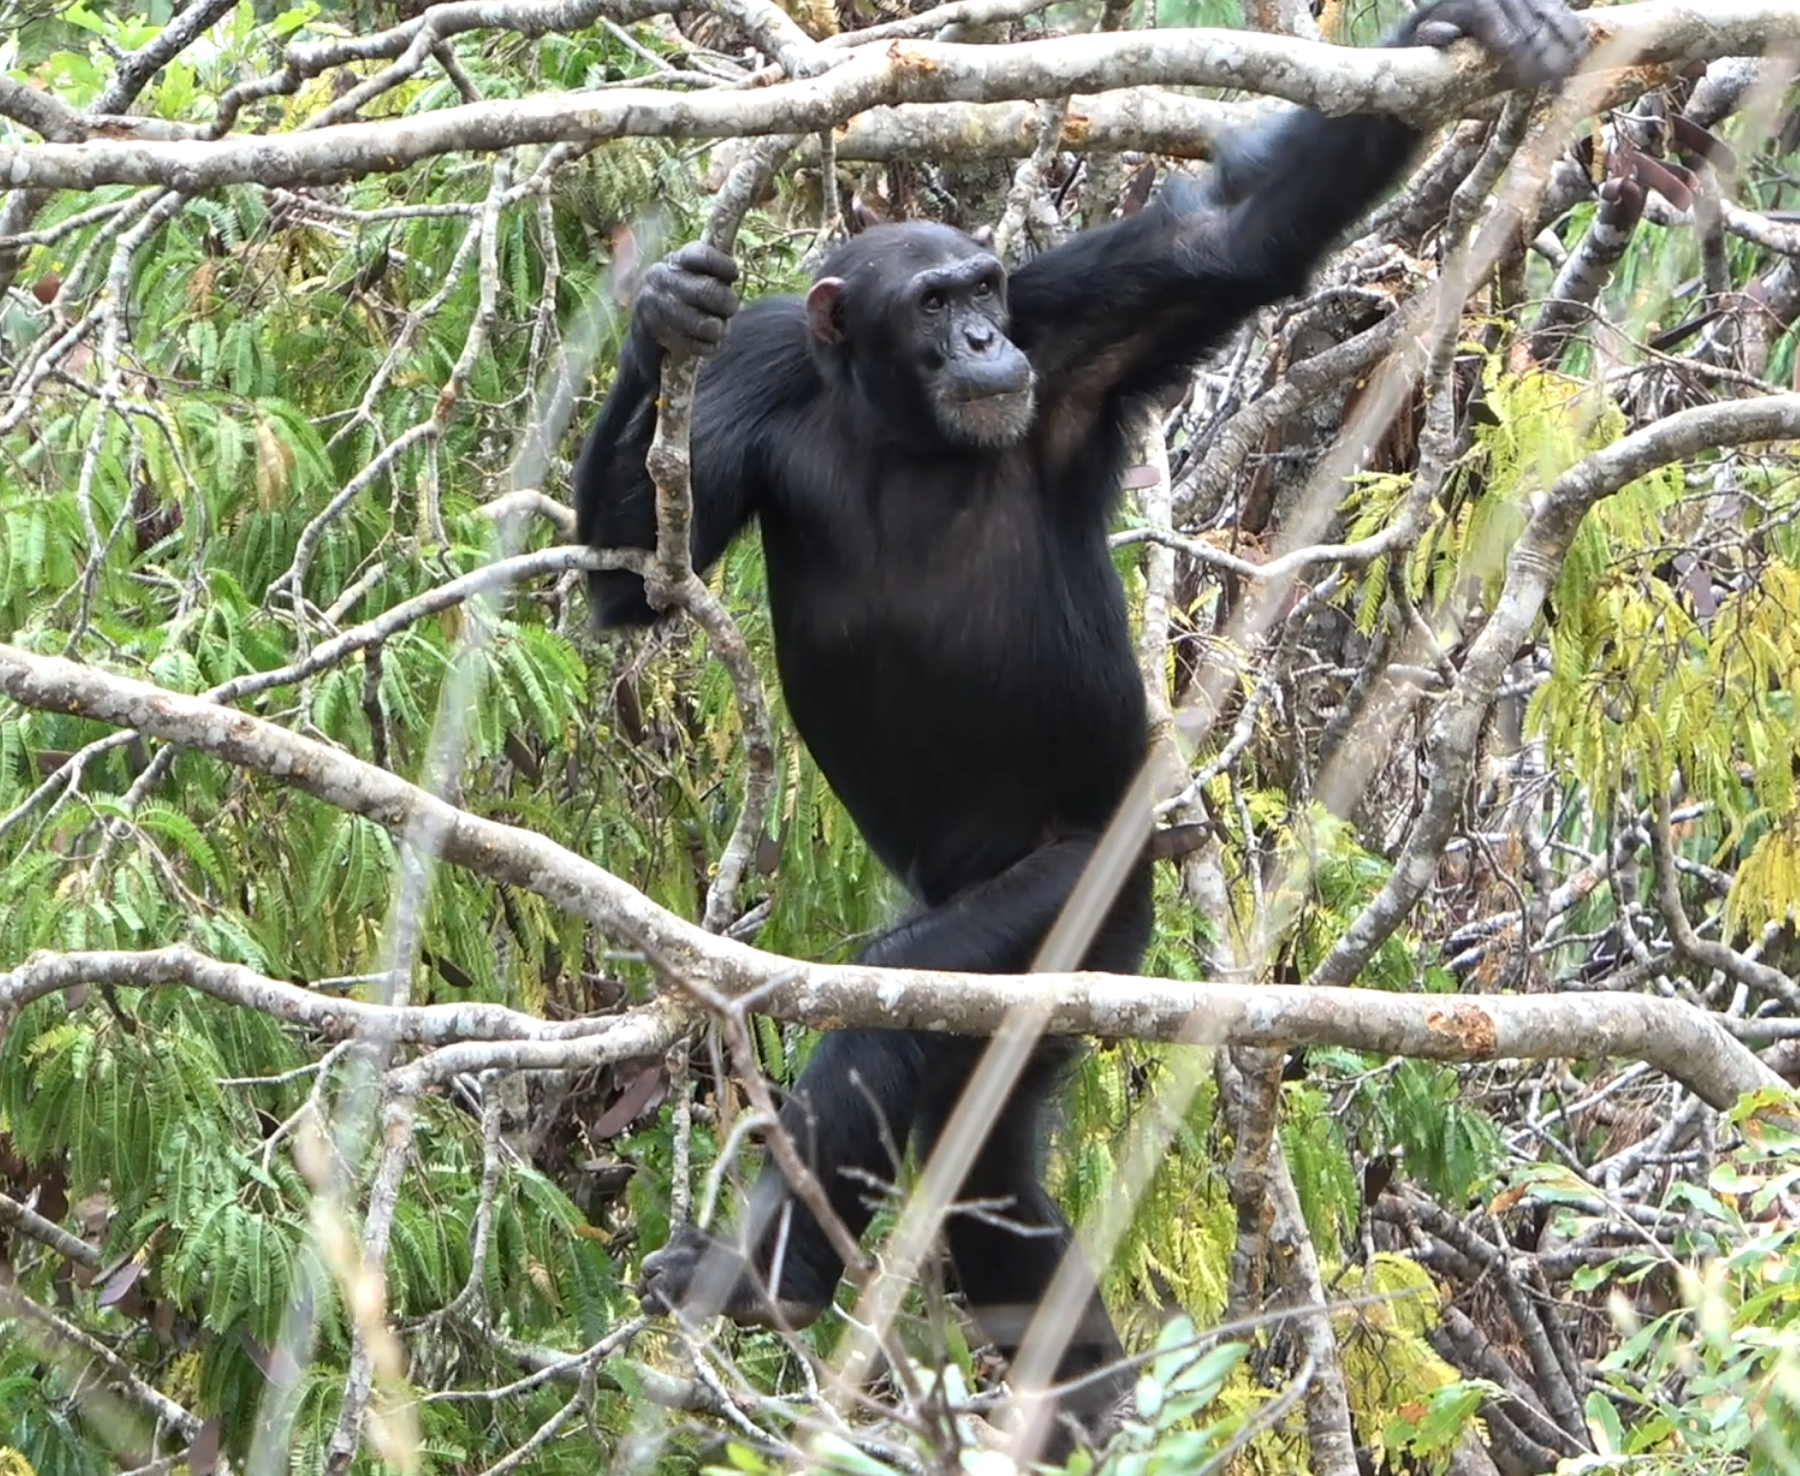 A chimp stands upright on his hind legs, up in trees.